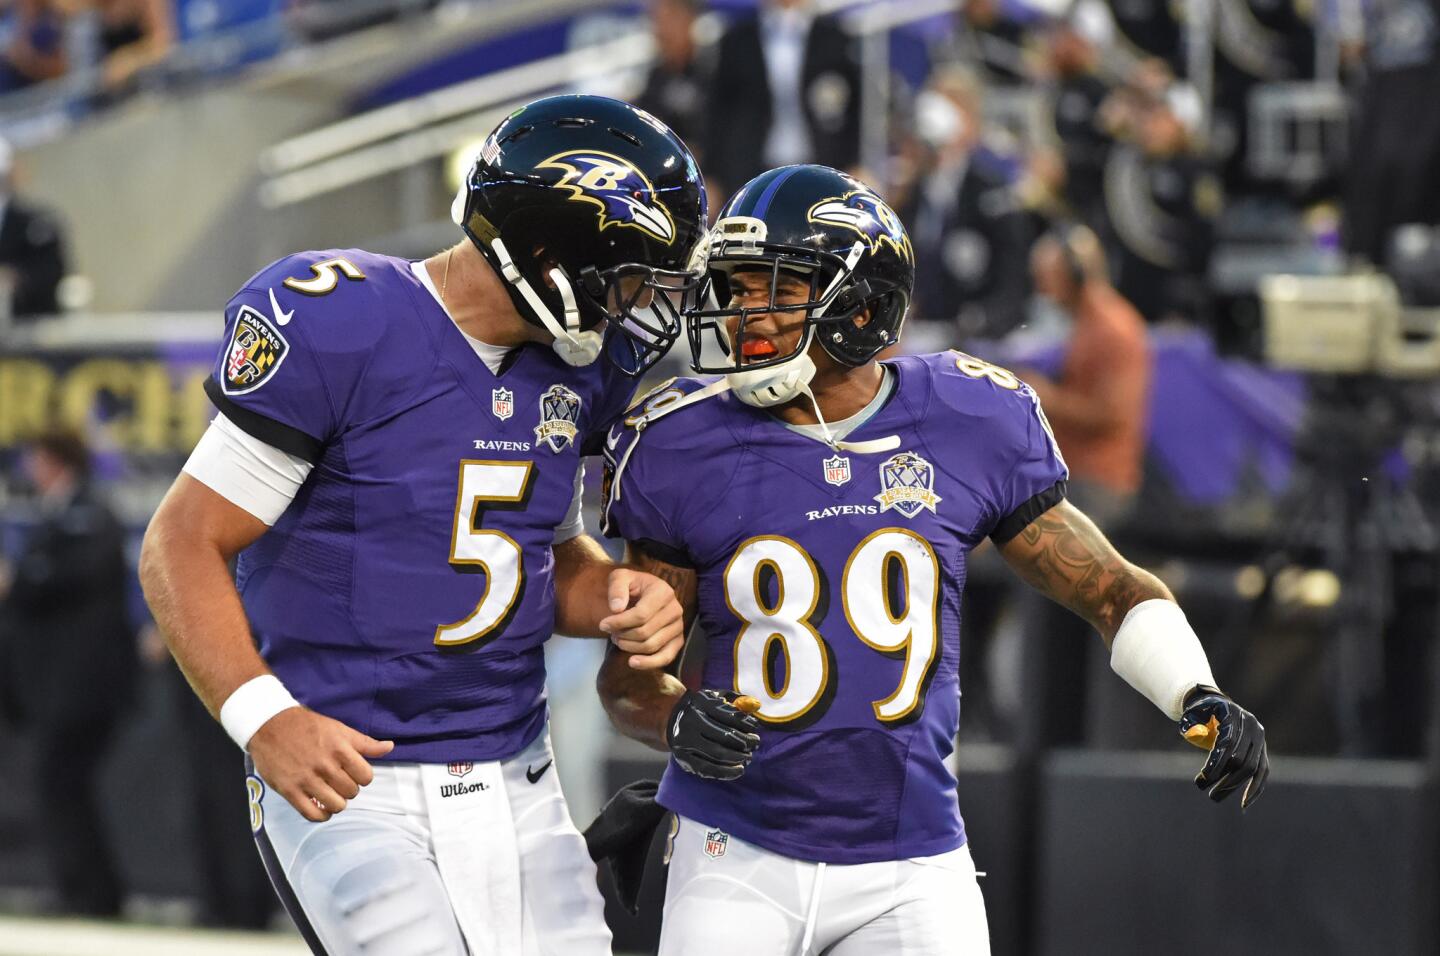 Ravens quarterback Joe Flacco, left, celebrates with wide receiver Steve Smith Sr., after the two connected for a 63-yard touchdown.